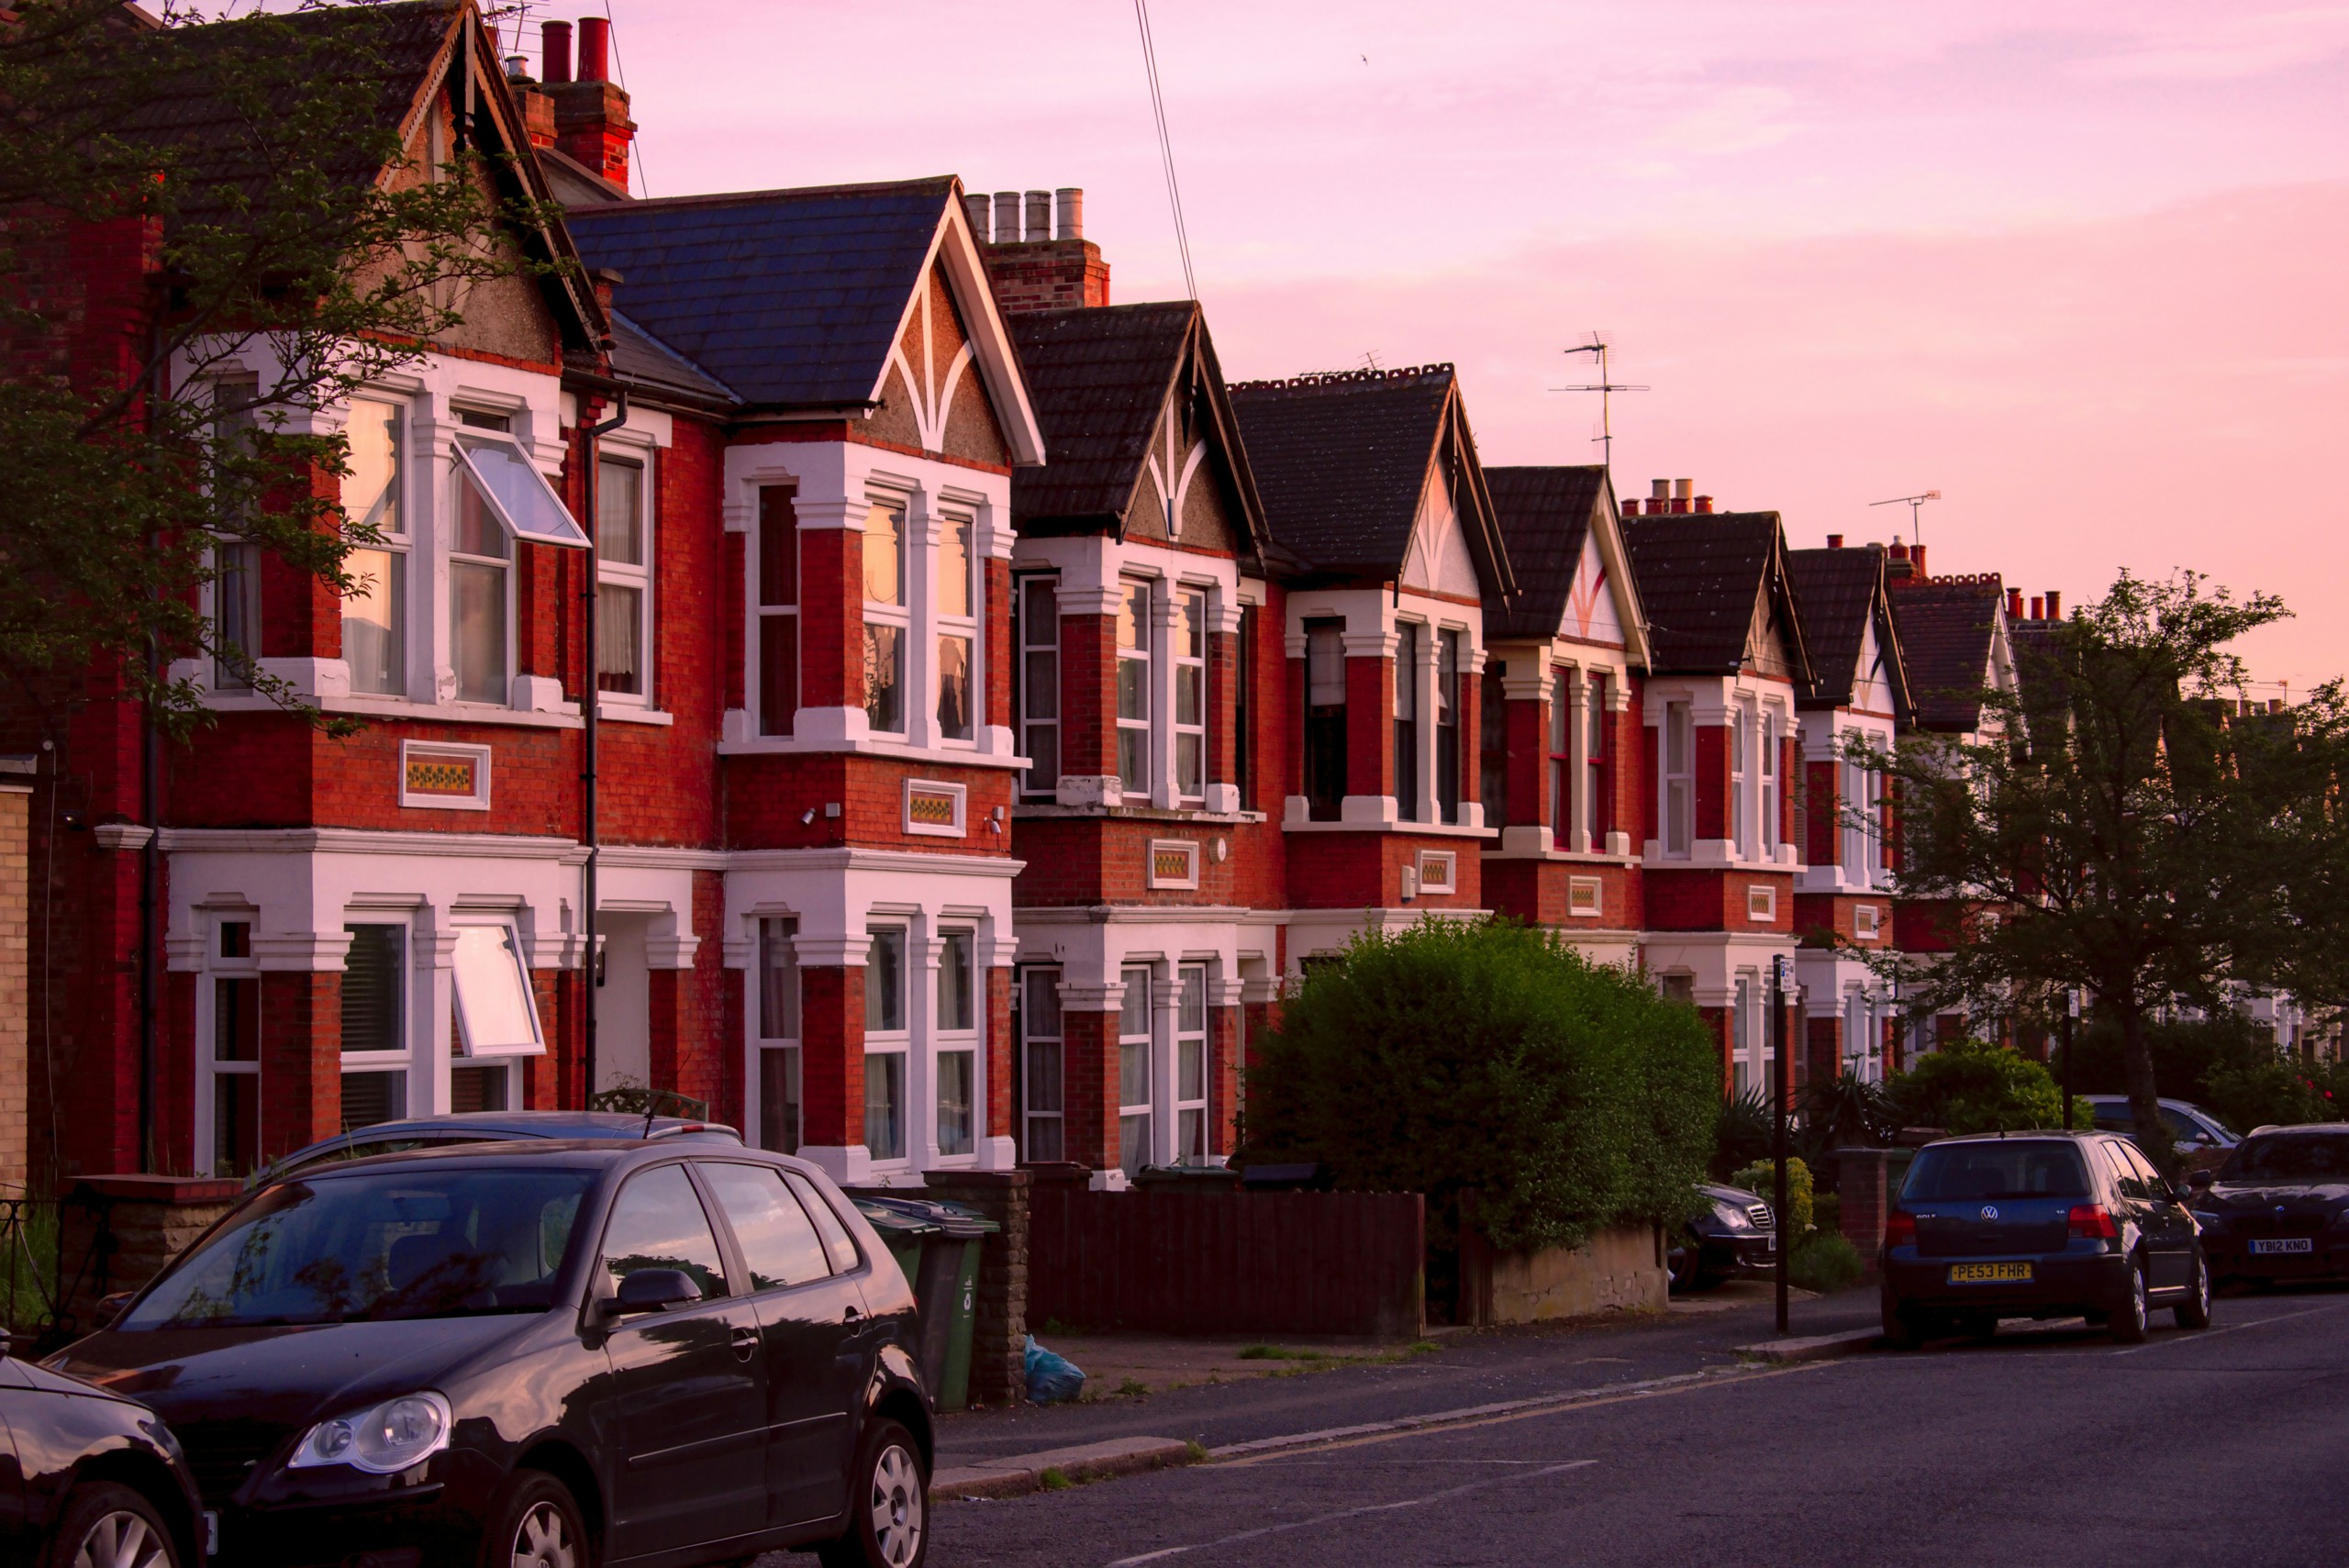 5 Things to Consider When Buying a Rental Property in the UK